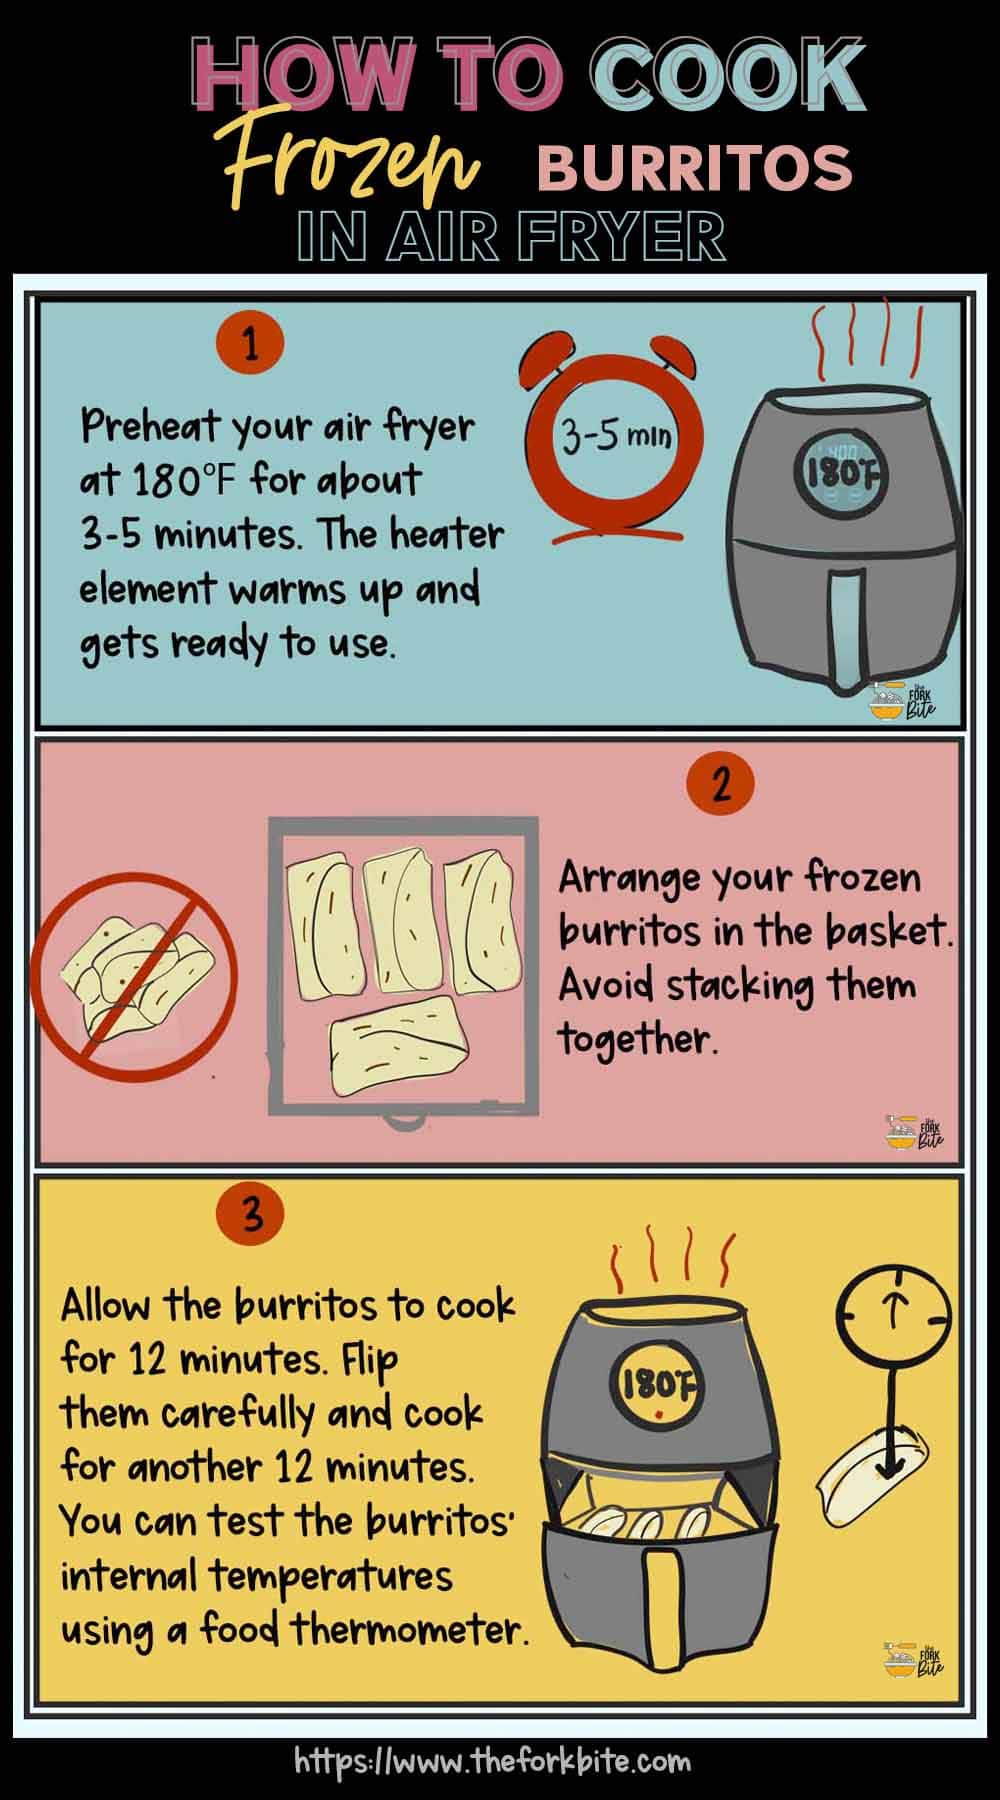 Here's the infographic that shows how to cook frozen burrito in air fryer. The perfect, cooked from frozen burrito should be a little soft on the outside while still looking nicely browned. the filling should be moist, lovely, and warm.